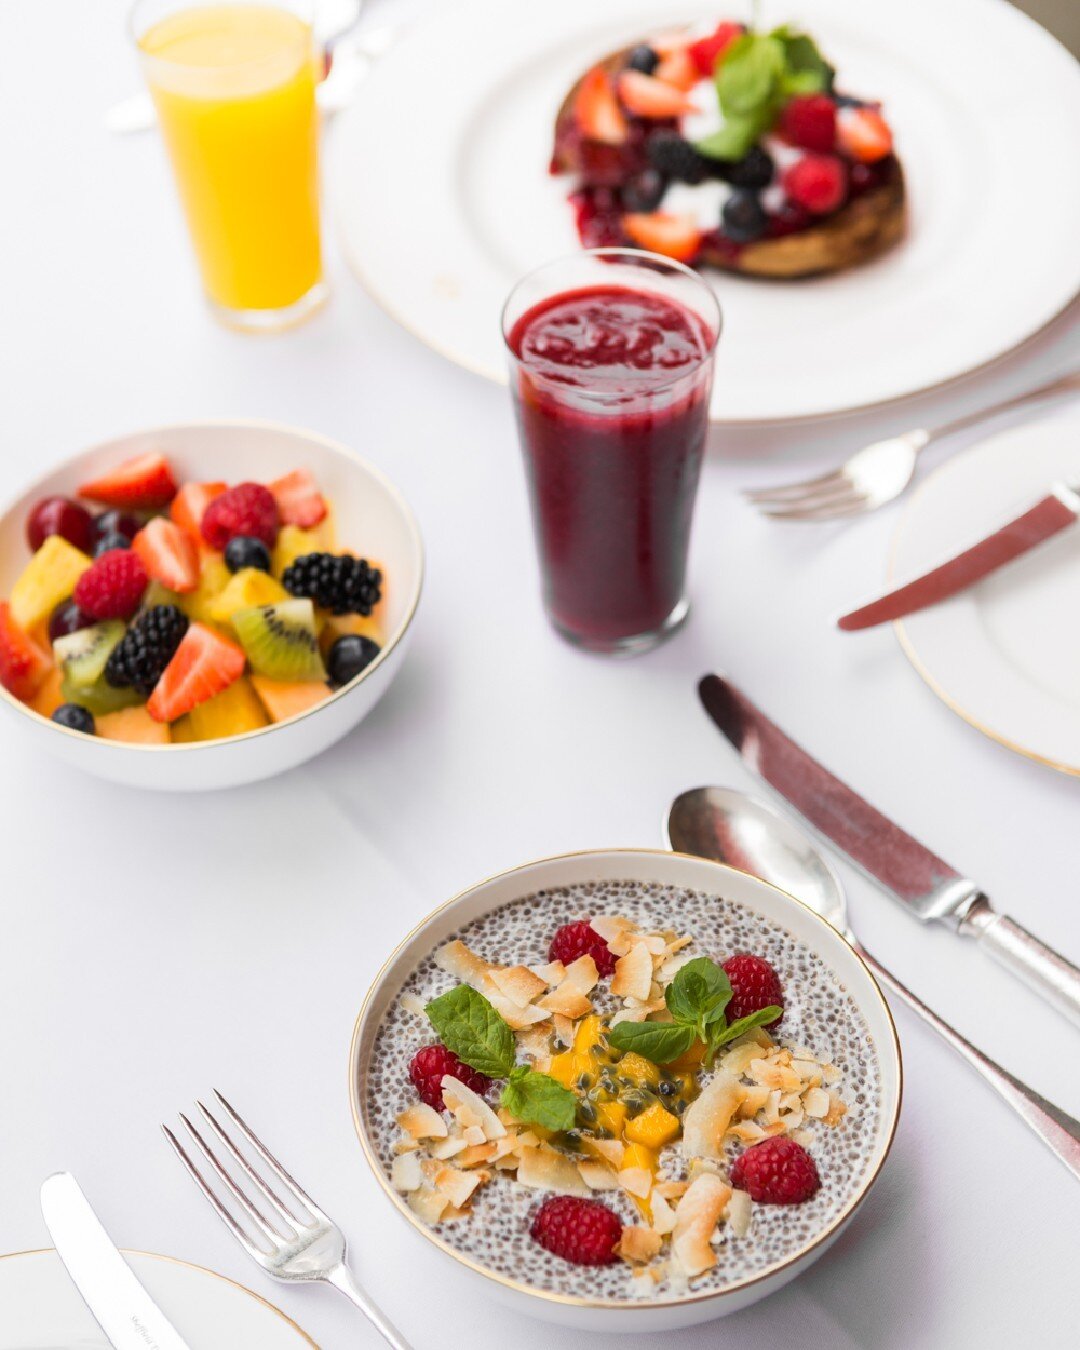 Rise &amp; shine! For our #Vegan friends, our breakfast menu is brimming with lots of delicious options 🥝🍓🍴

#45JermynSt #JermynSt #MeatfreeMonday #breakfast #brunch